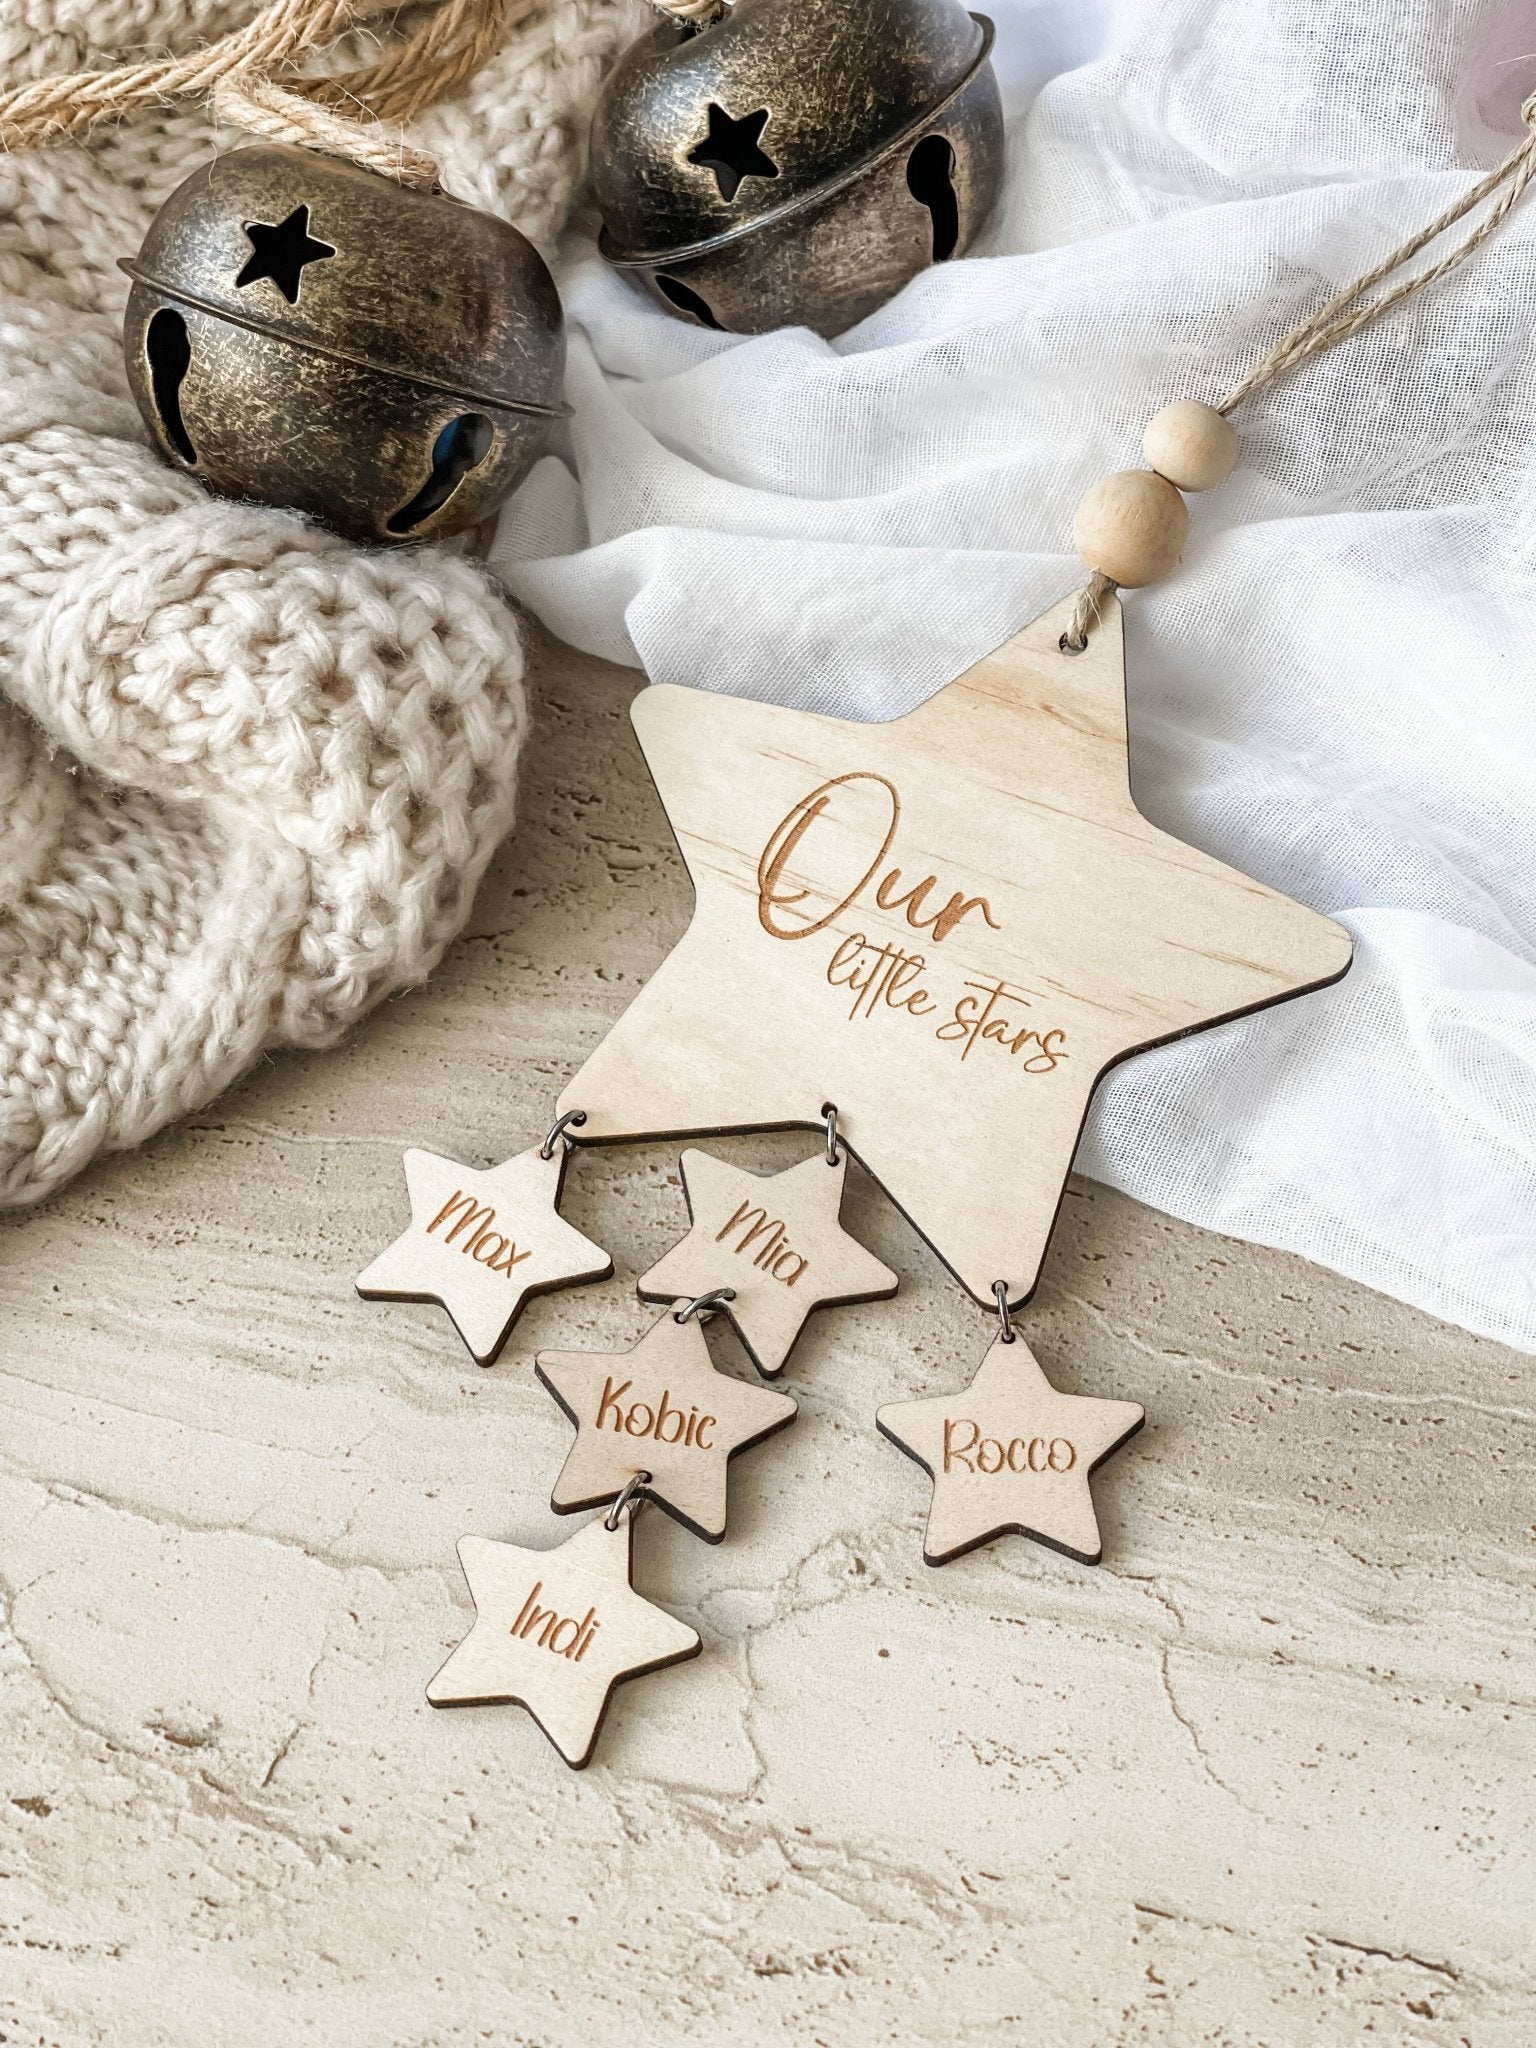 Our Little Stars Christmas Ornament - The Humble Gift Co.